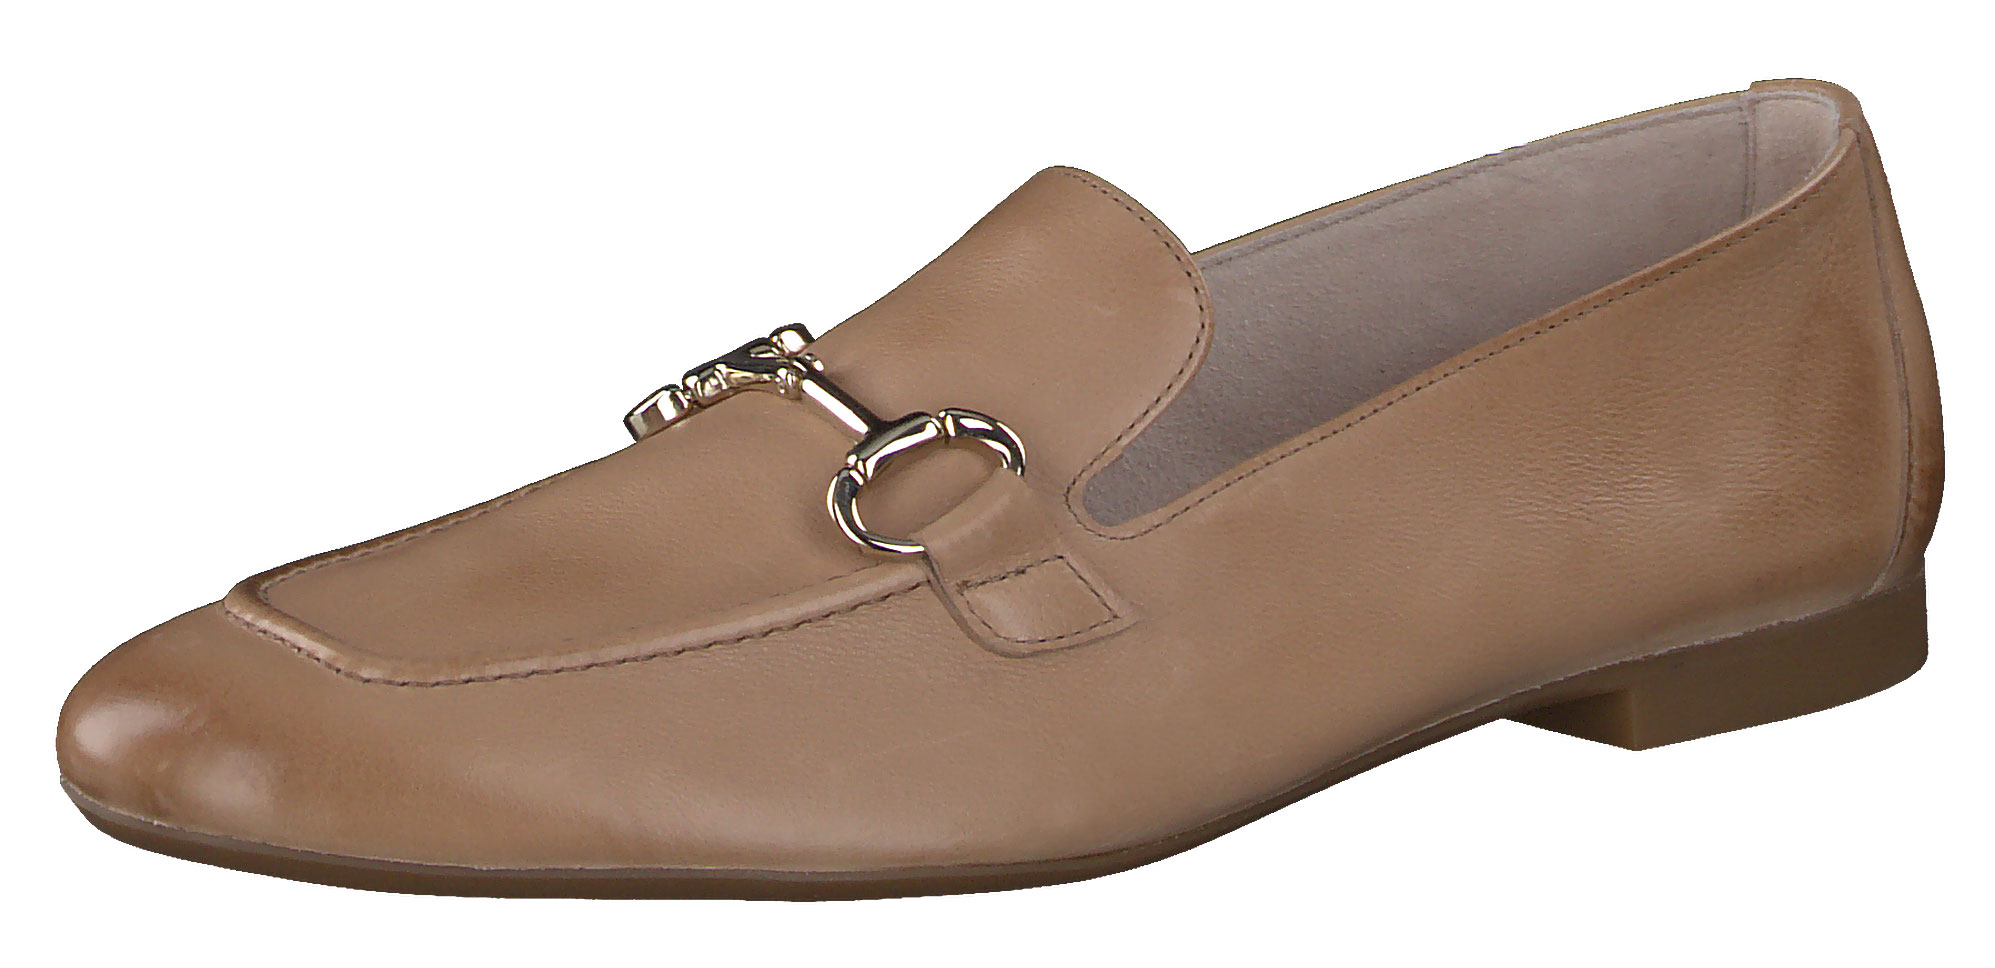 Paul Green Super Soft Loafer - Beige smooth leather